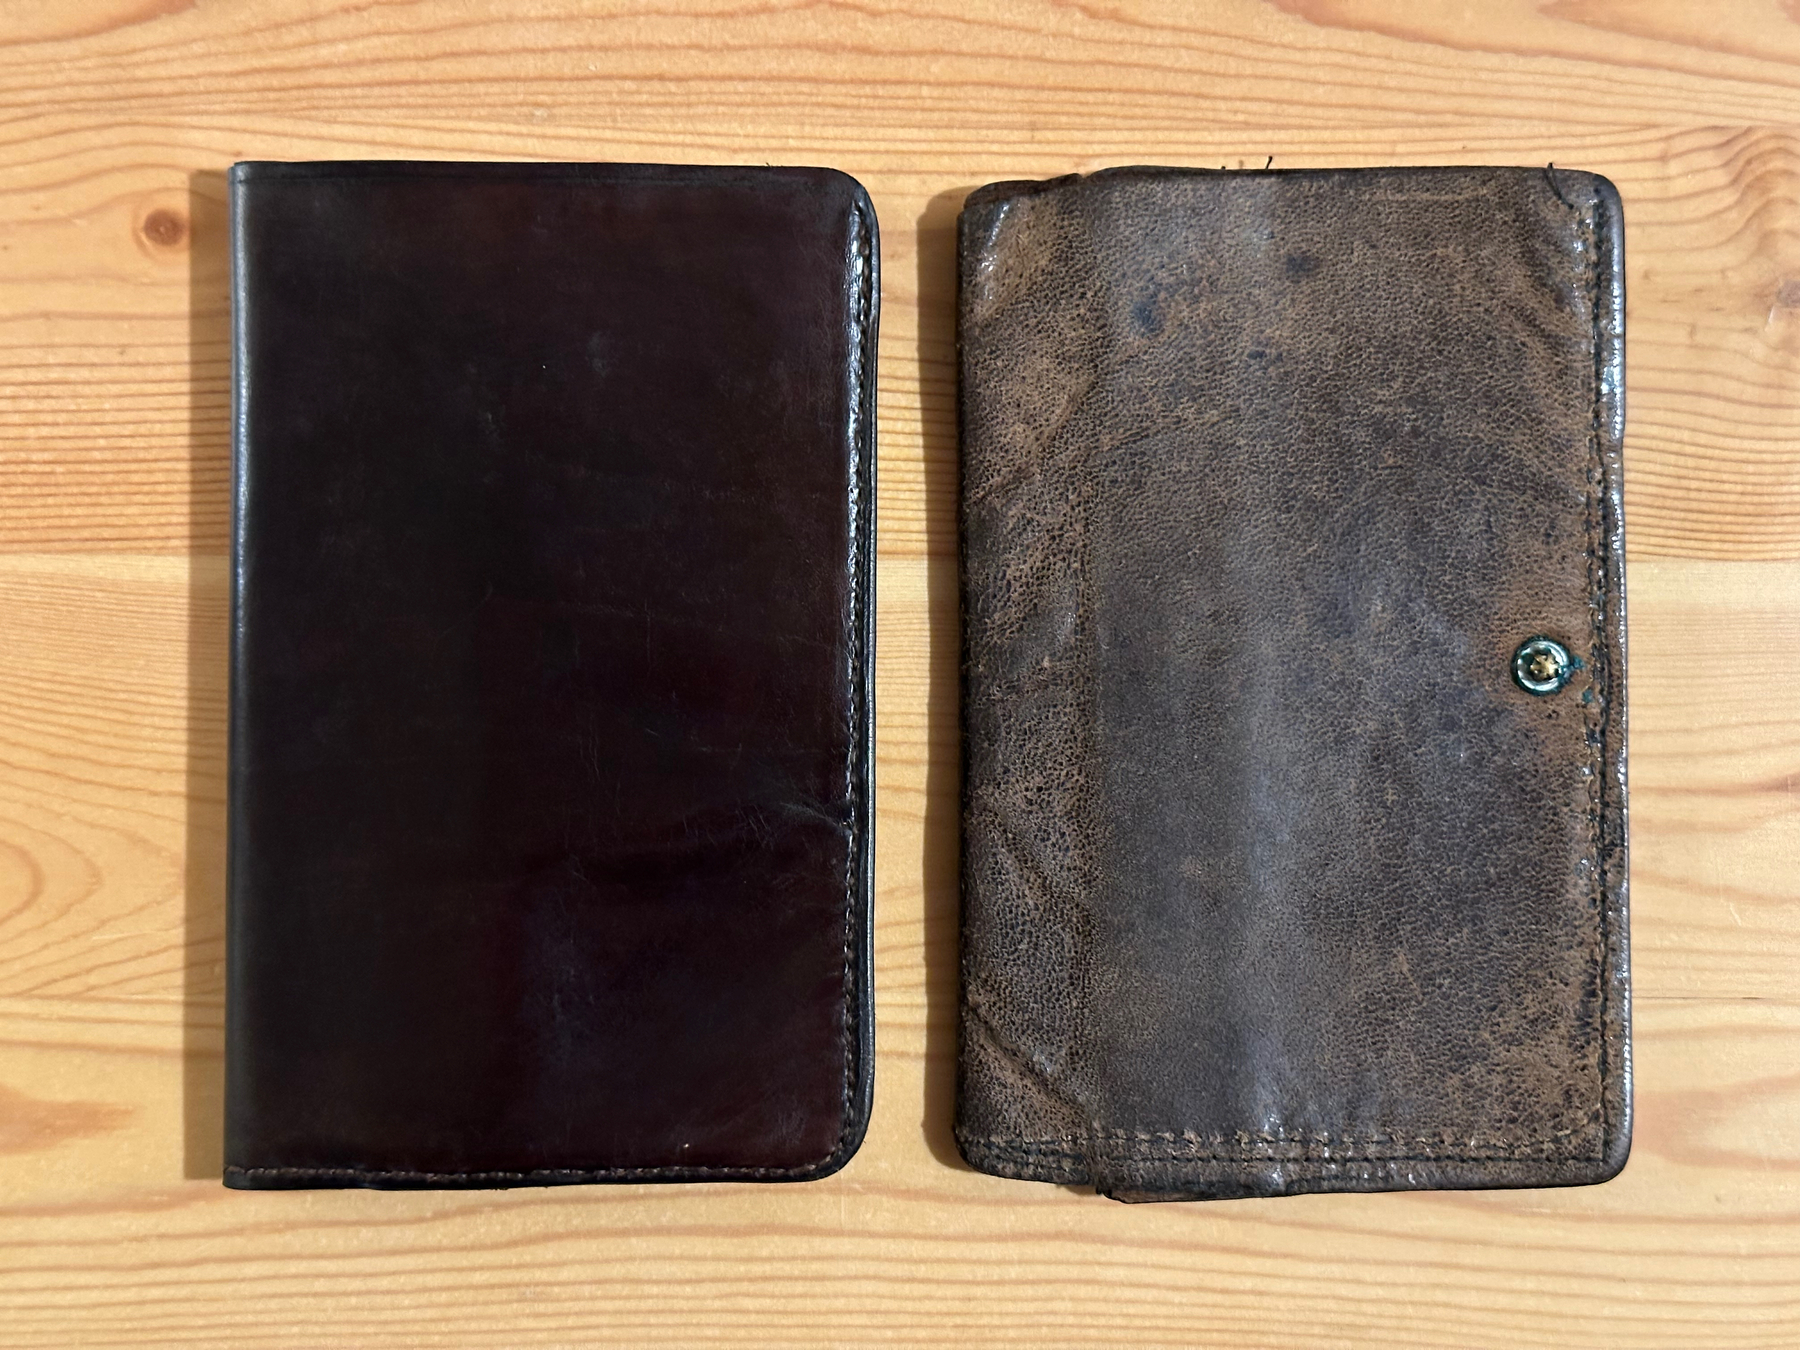 Original leather wallet and replica side by side on a table, shown closed